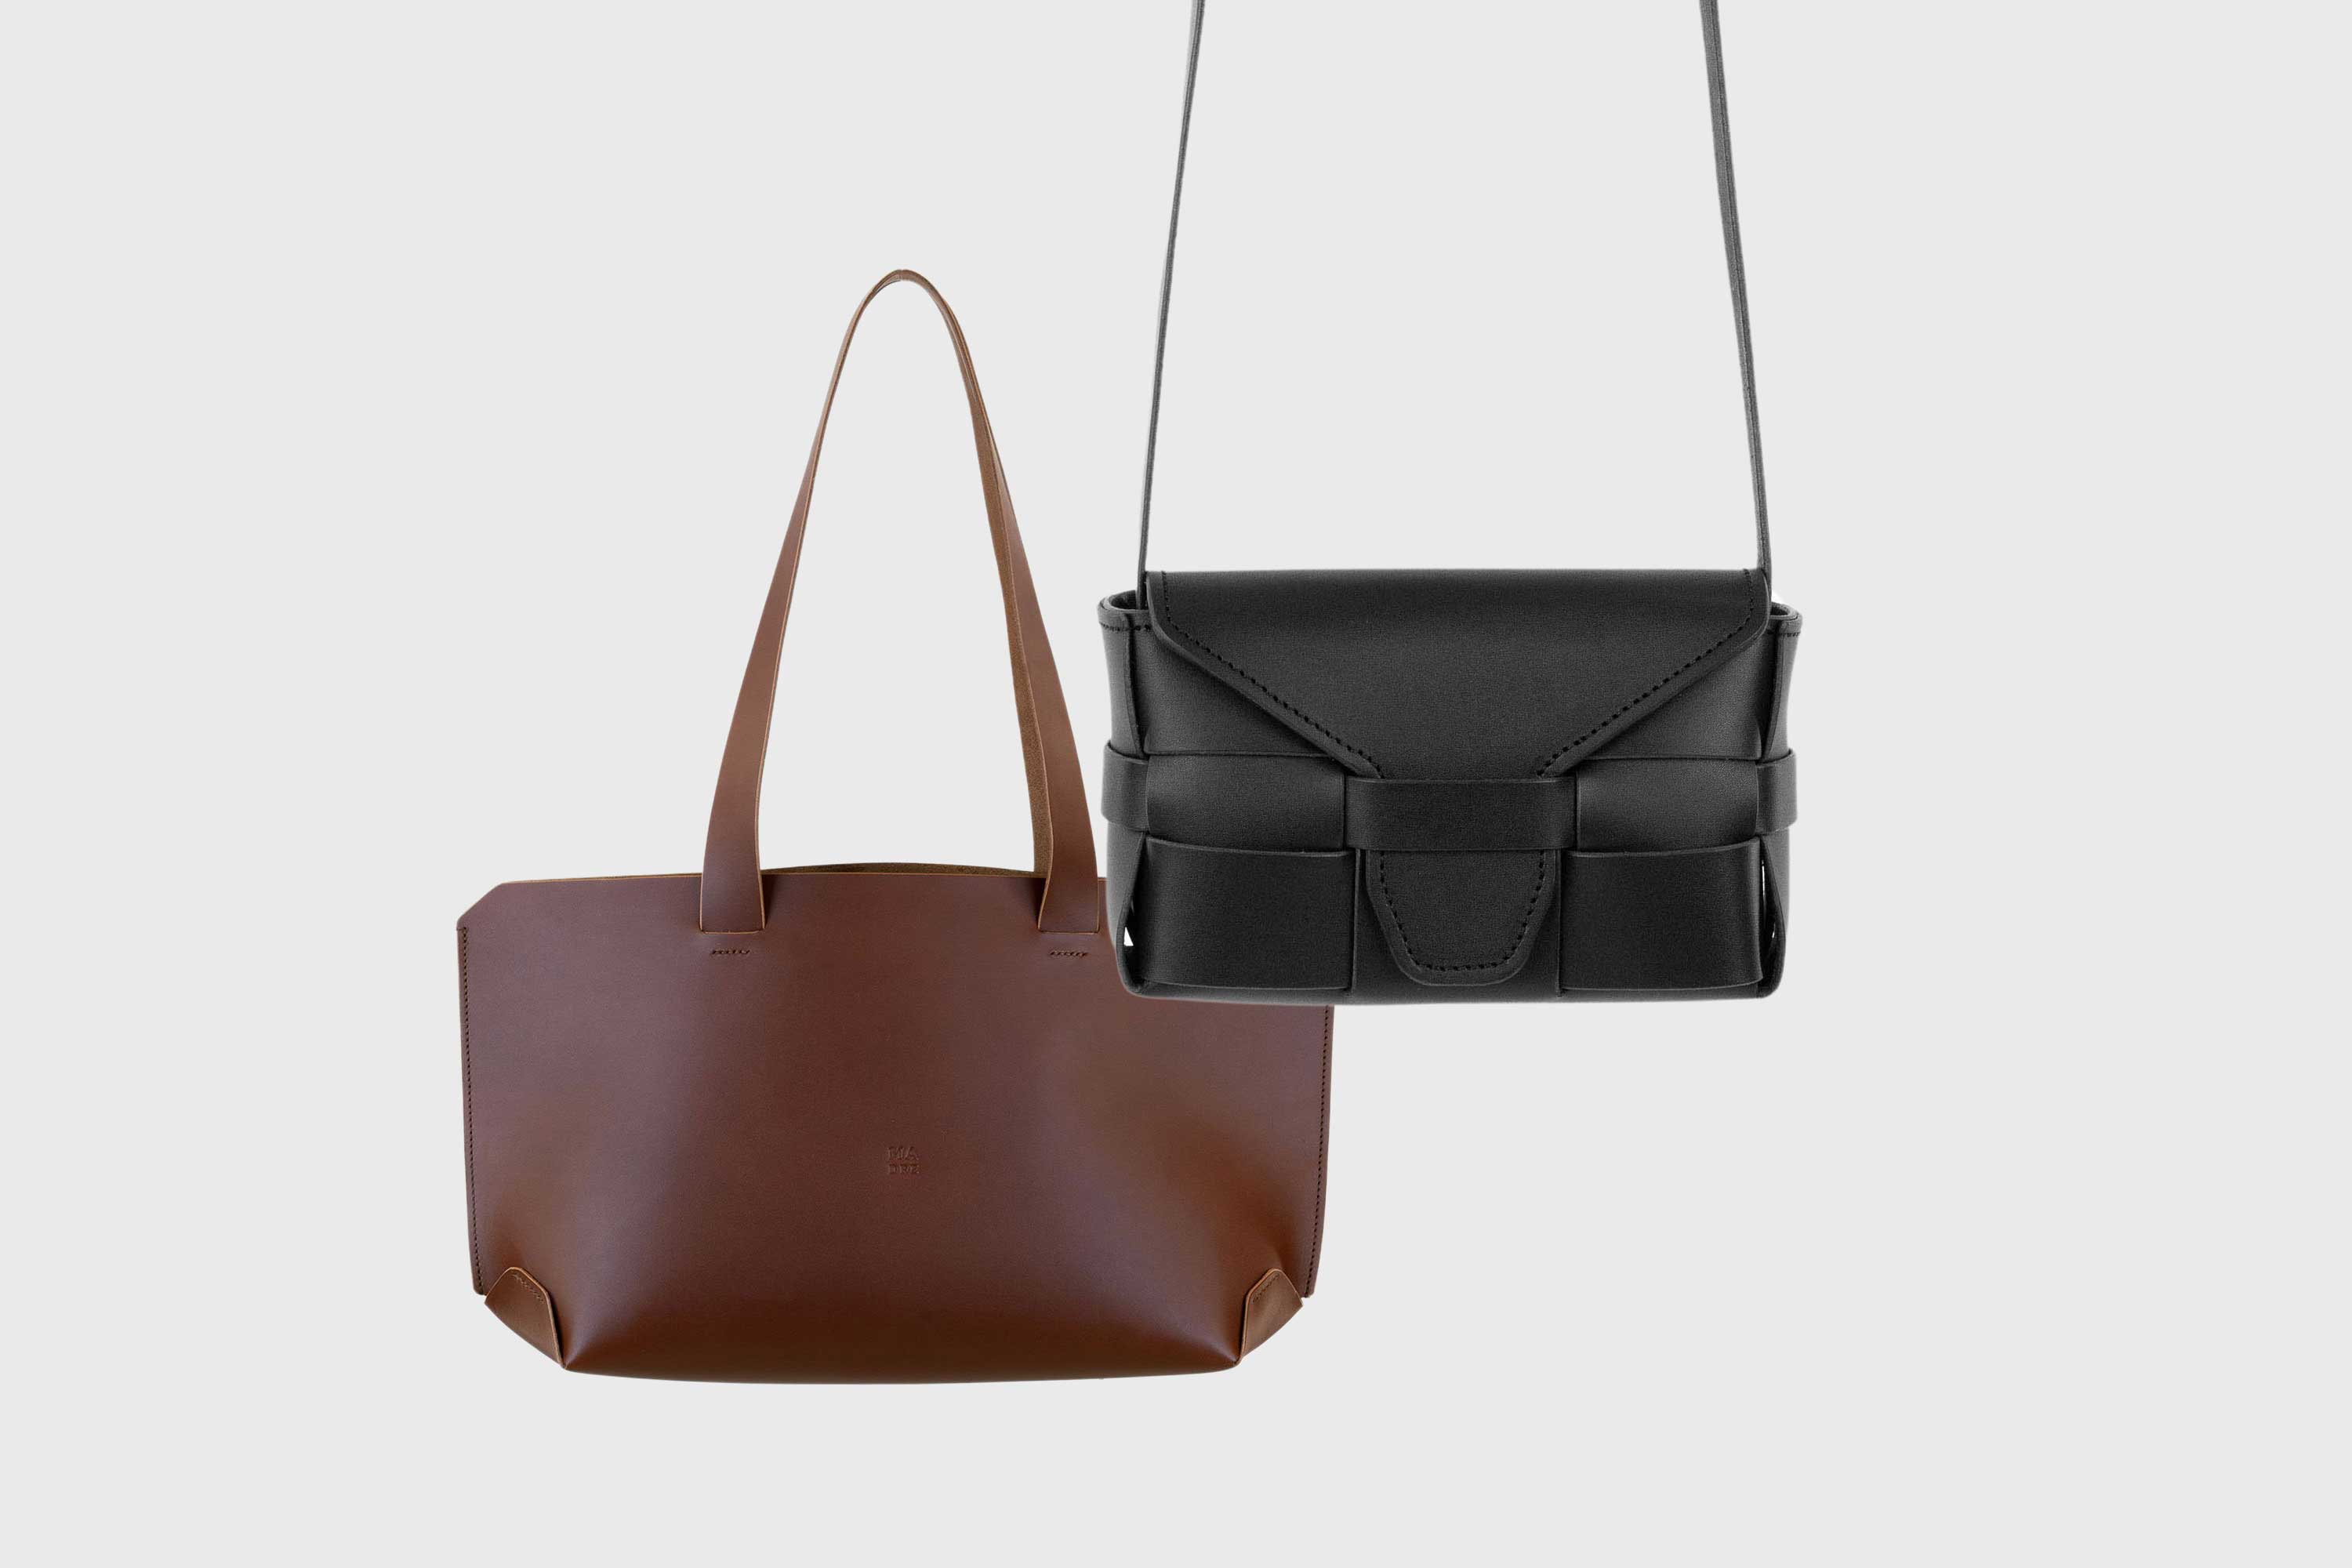 Tote Bag and Small Bag Atelier Madre Manuel Dreesmann Barcelona